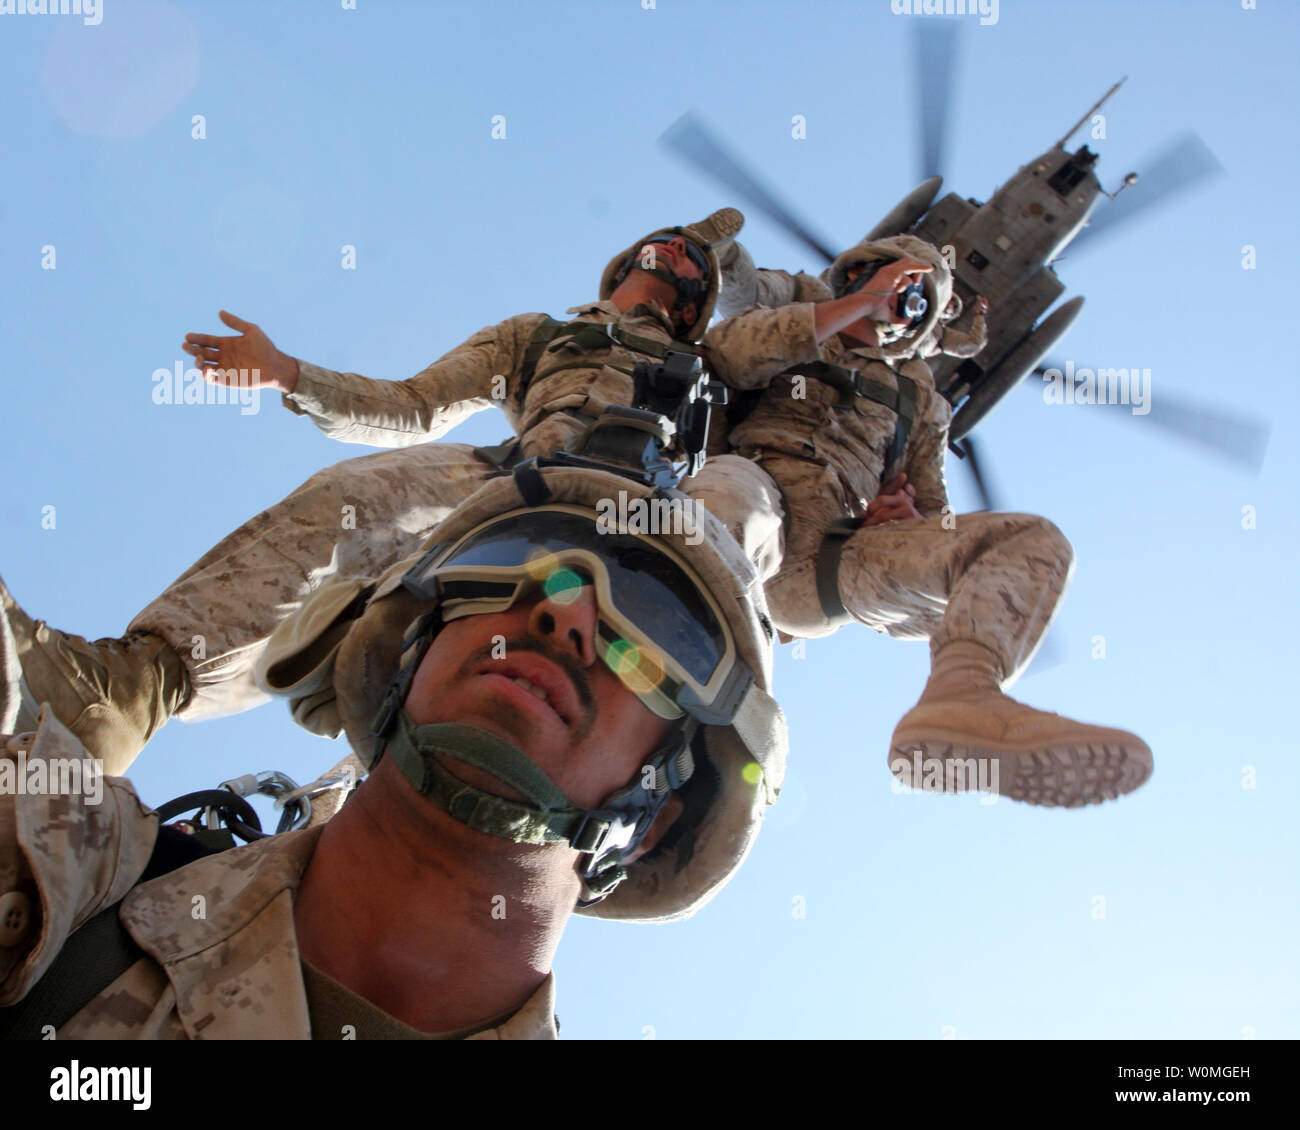 Marines from 24th Marine Expeditionary Unit are suspended from a CH-53 Super Stallion helicopter from Marine Medium Tilt Rotor Squadron 162 during an exercise in Djibouti on March 24, 2010. UPI/Alex C. Sauceda/U.S. Army Stock Photo